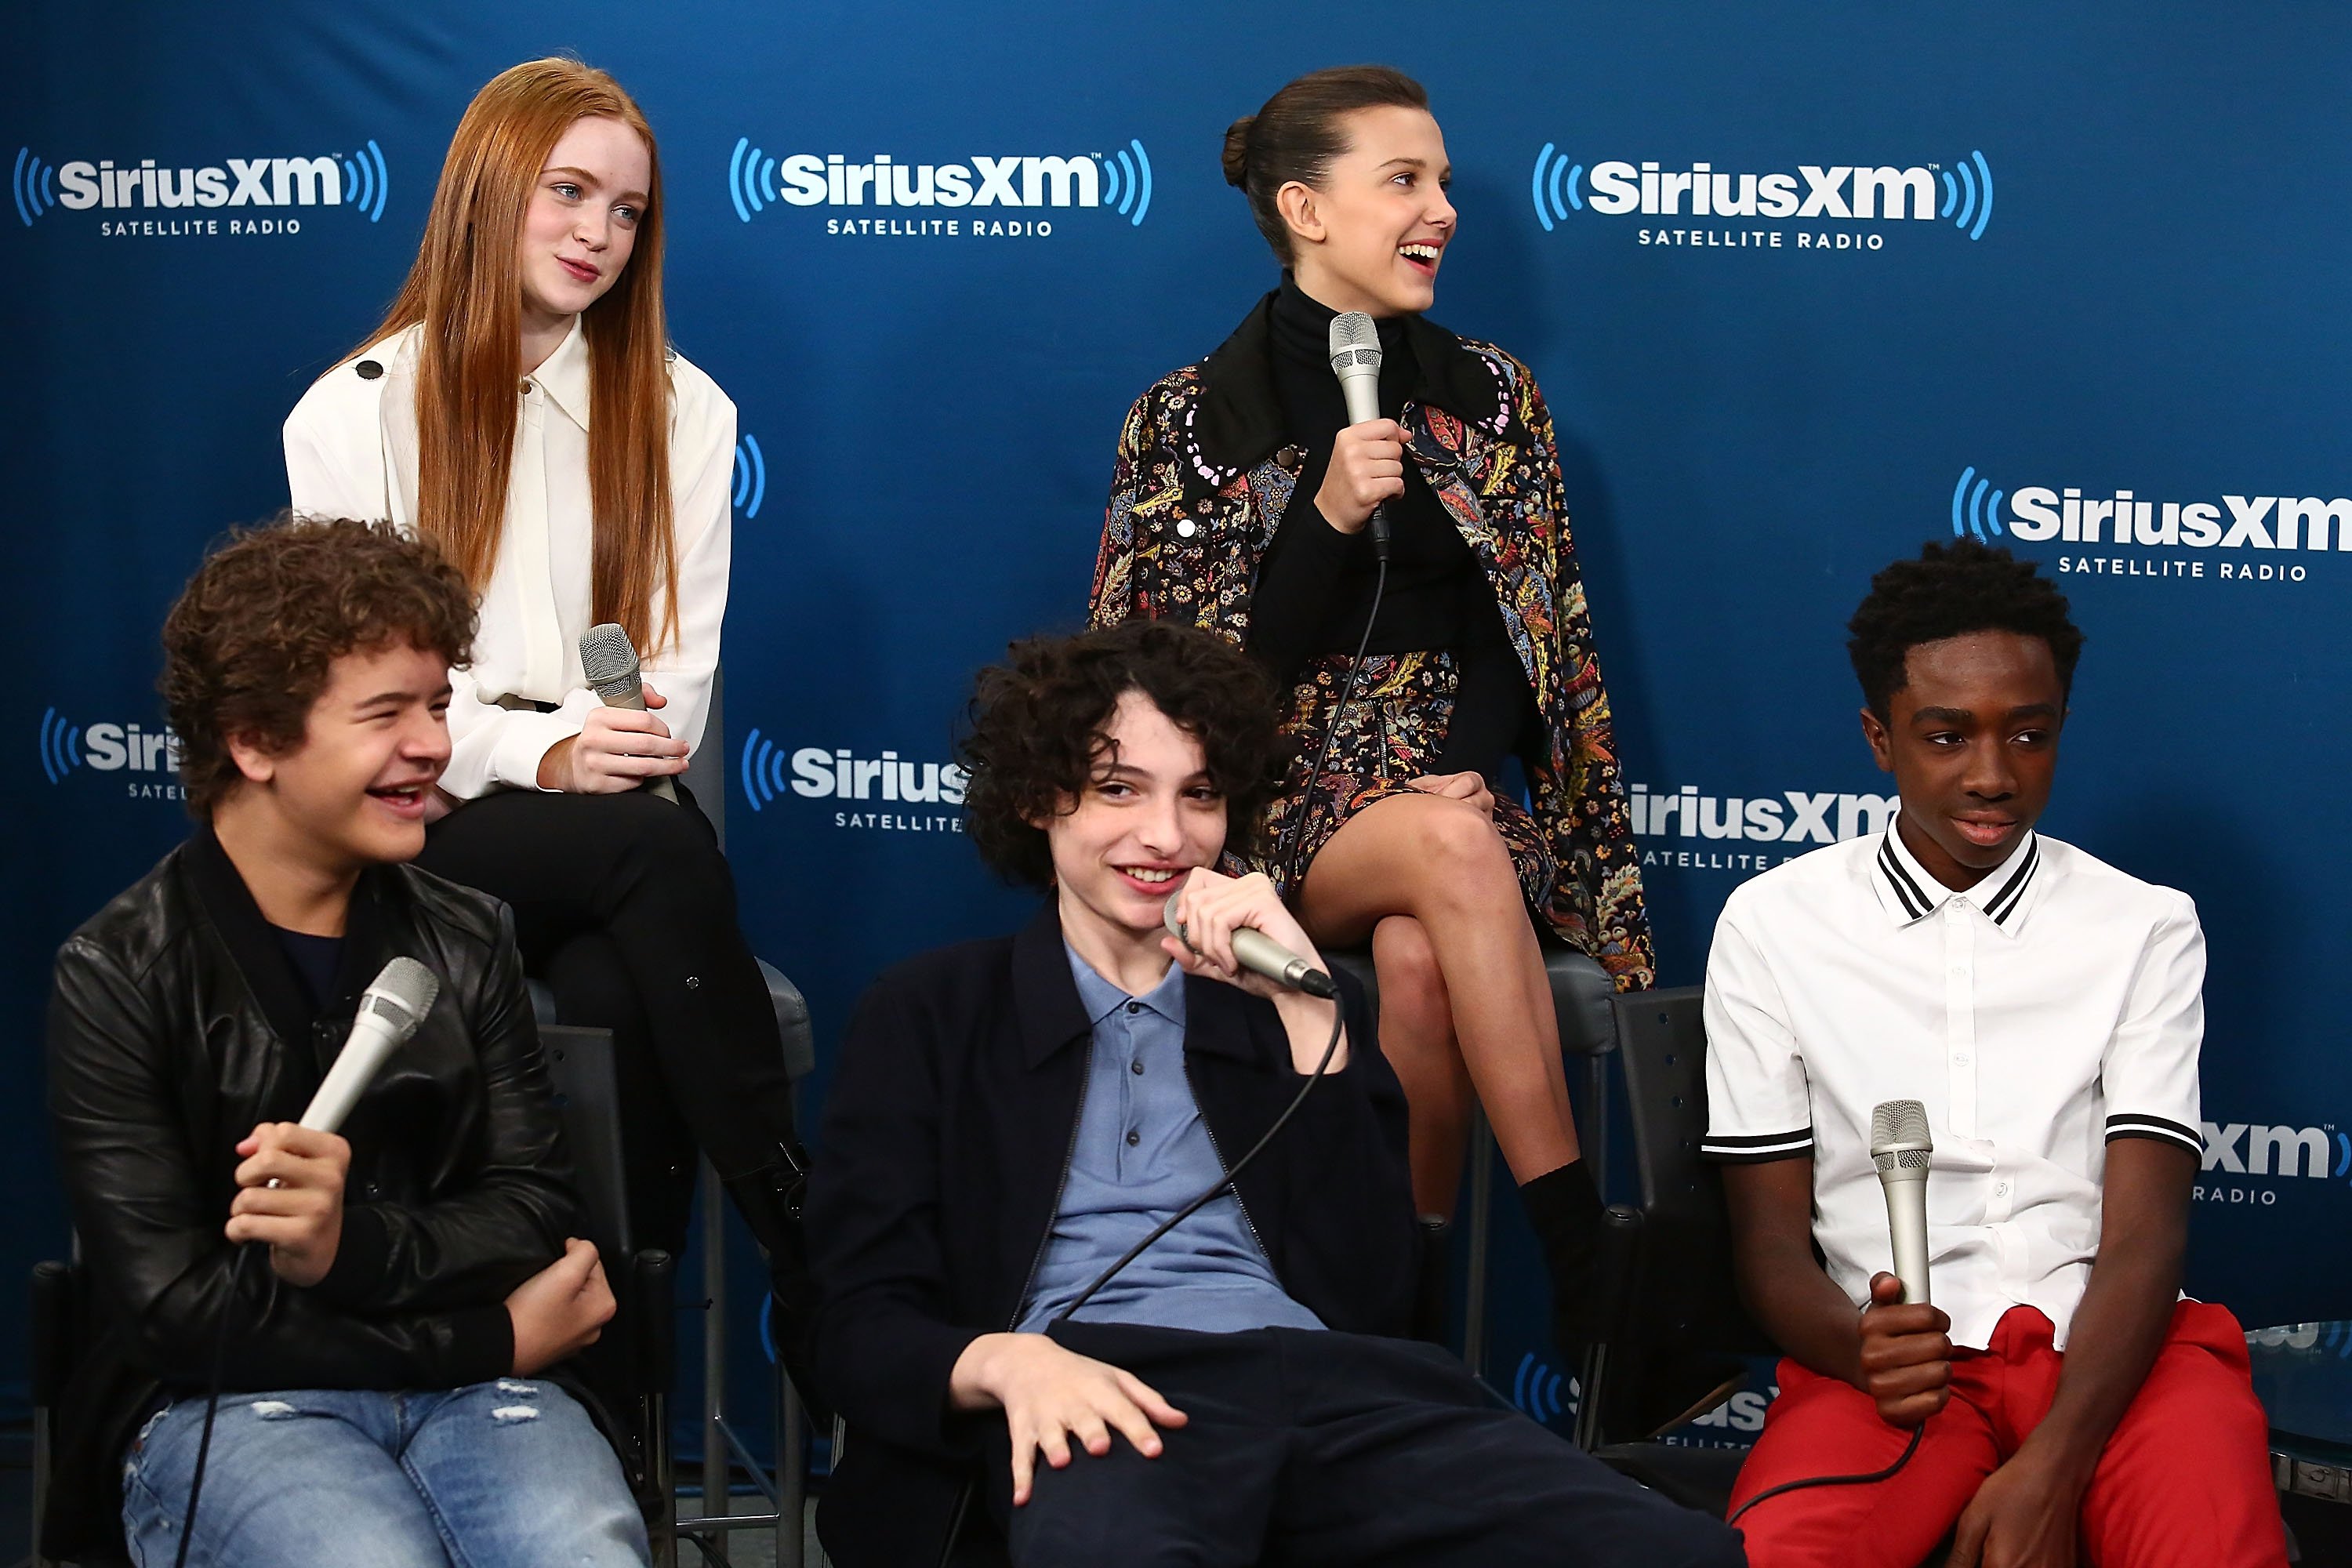 NEW YORK, NY - NOVEMBER 01: (Clockwise from top left) Actors Sadie Sink, Millie Bobby Brown, Caleb McLaughlin, Finn Wolfhard and Gaten Matarazzo attend SiriusXM's 'Town Hall' cast of Stranger Things on SiriusXM's Entertainment Weekly Radio on November 1, 2017 in New York City.